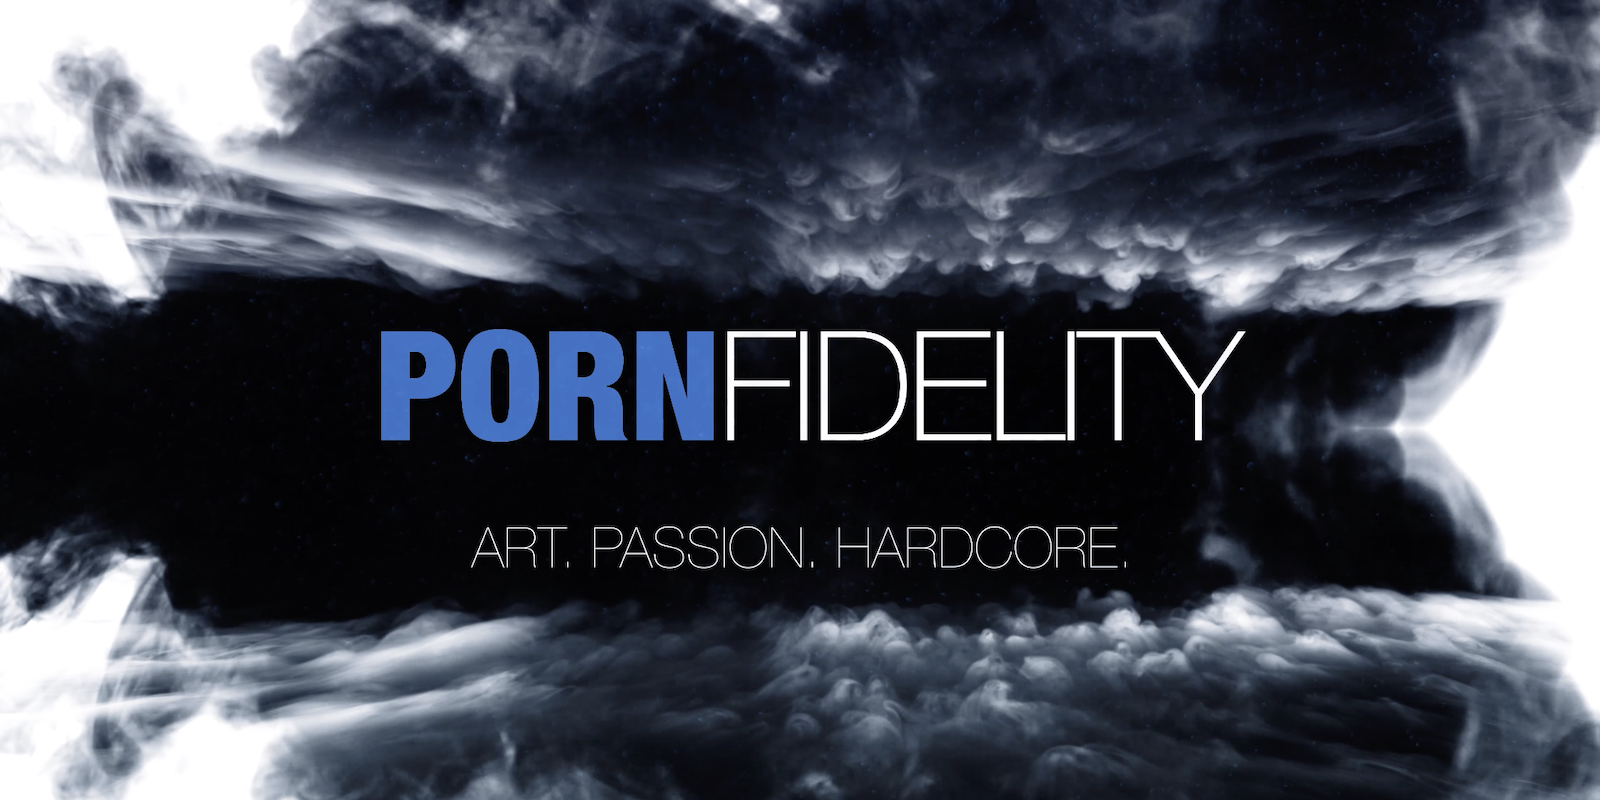 porn fidelity cost features - featured